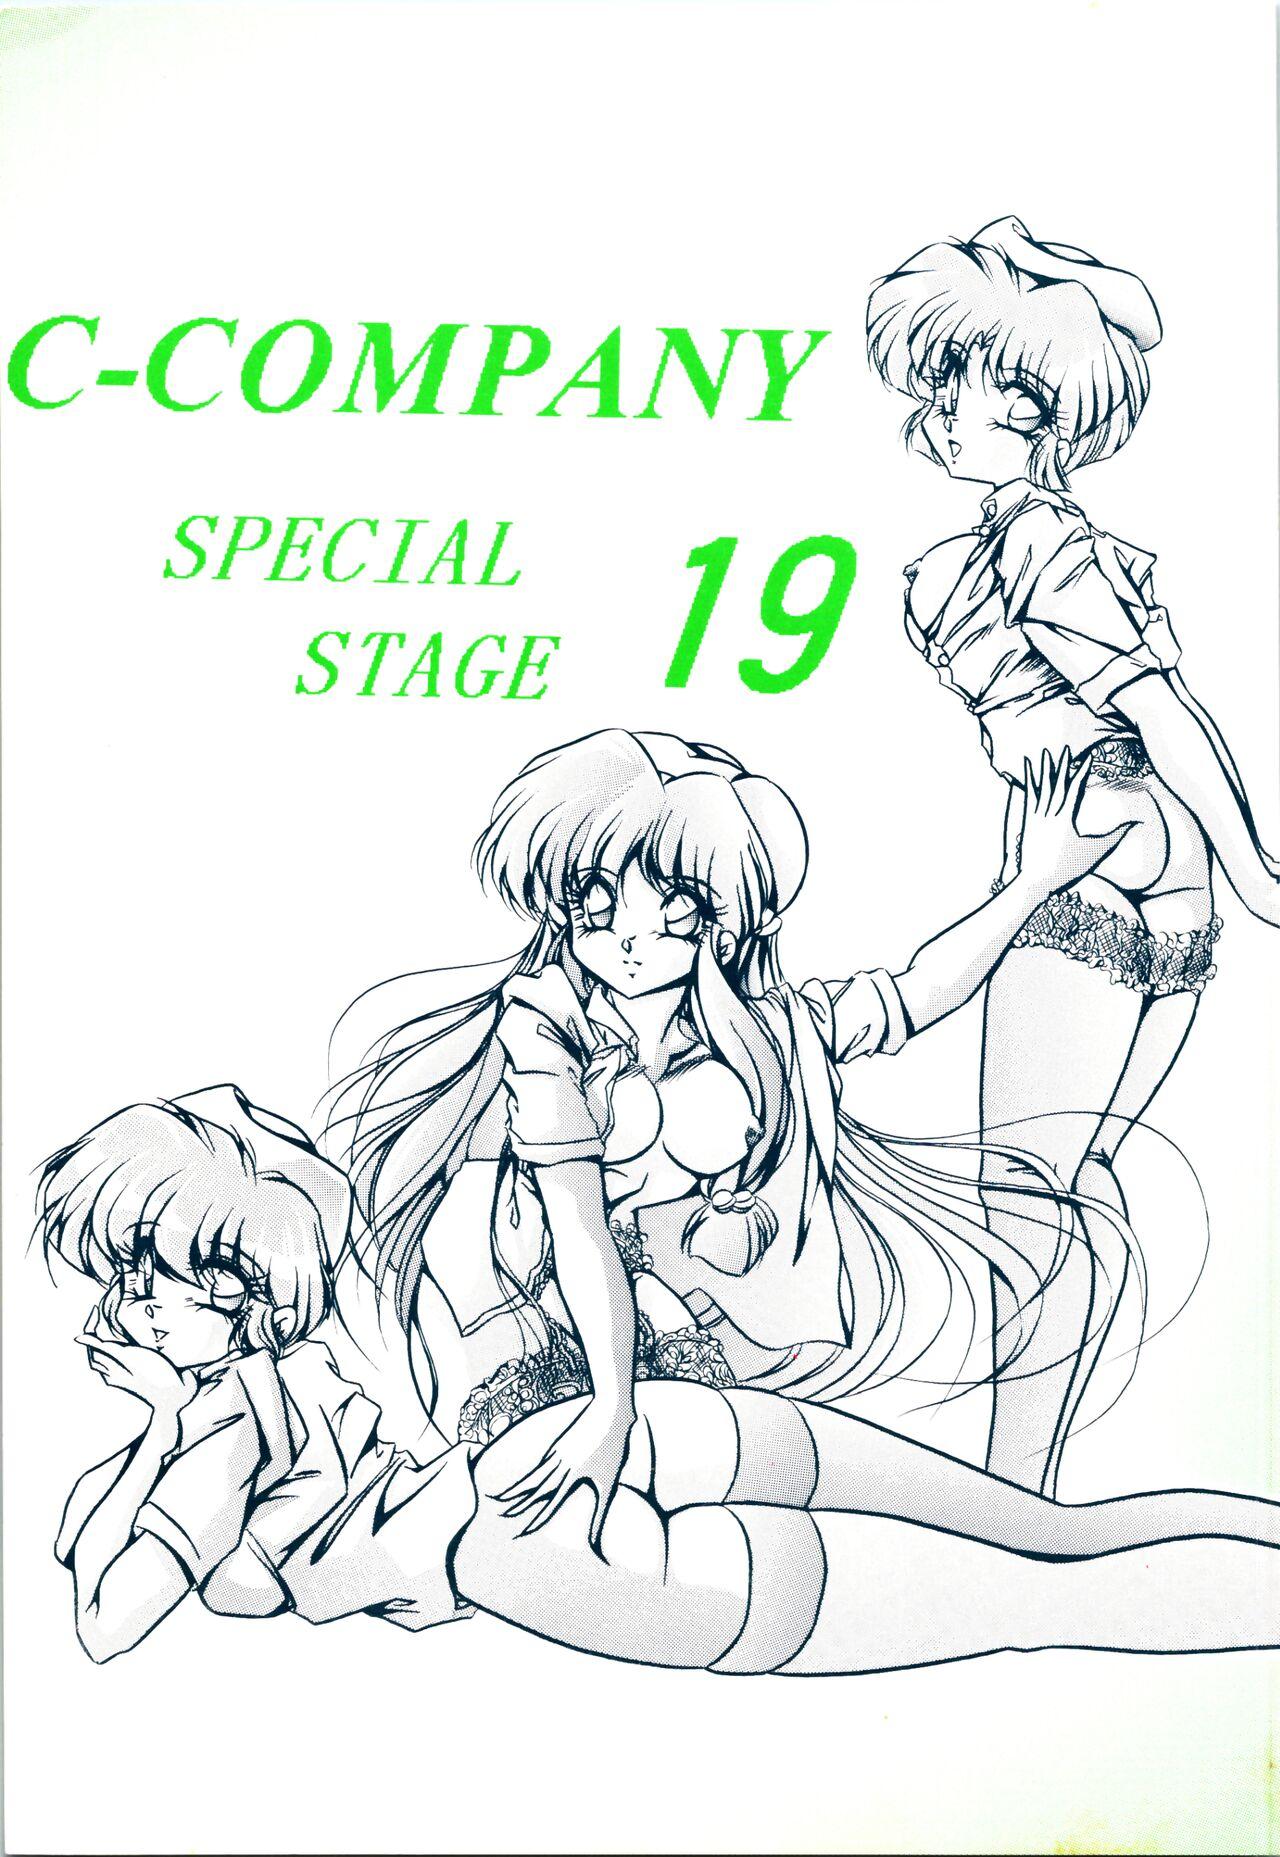 Butt C-COMPANY SPECIAL STAGE 19 - Ranma 12 Cameltoe - Page 1